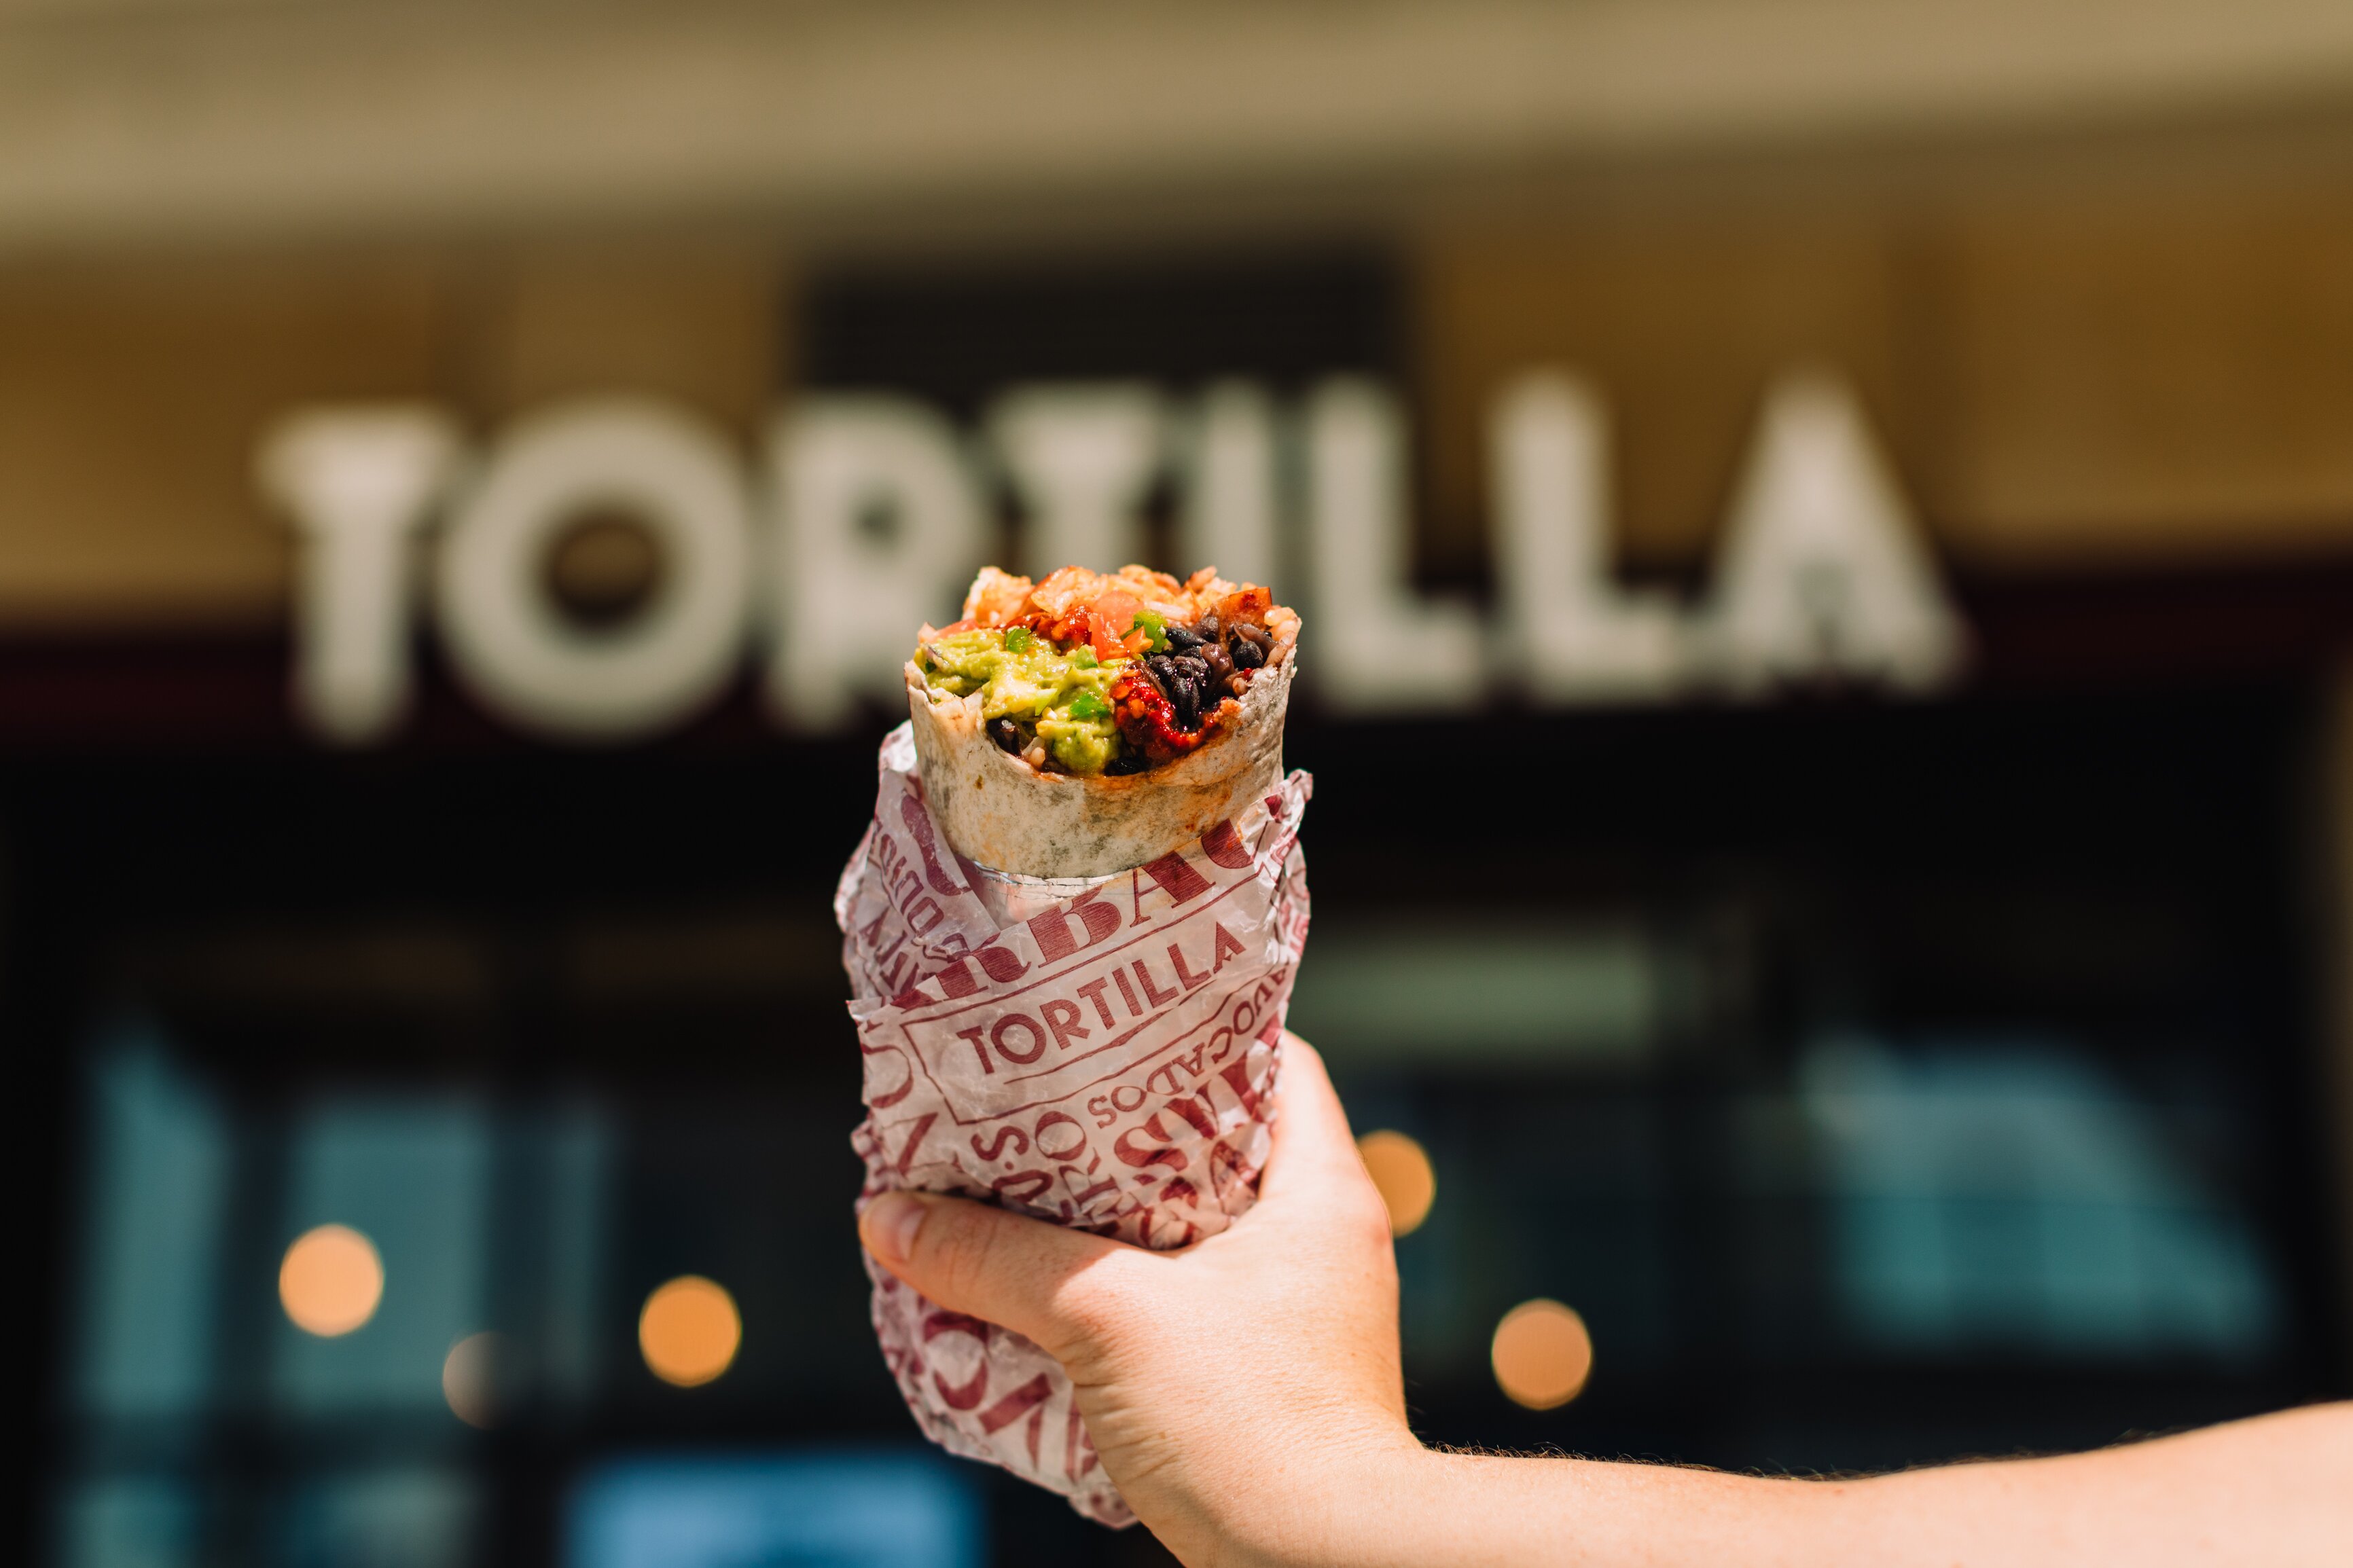 Tortilla 'enthusiastic' about year ahead following rise in revenue